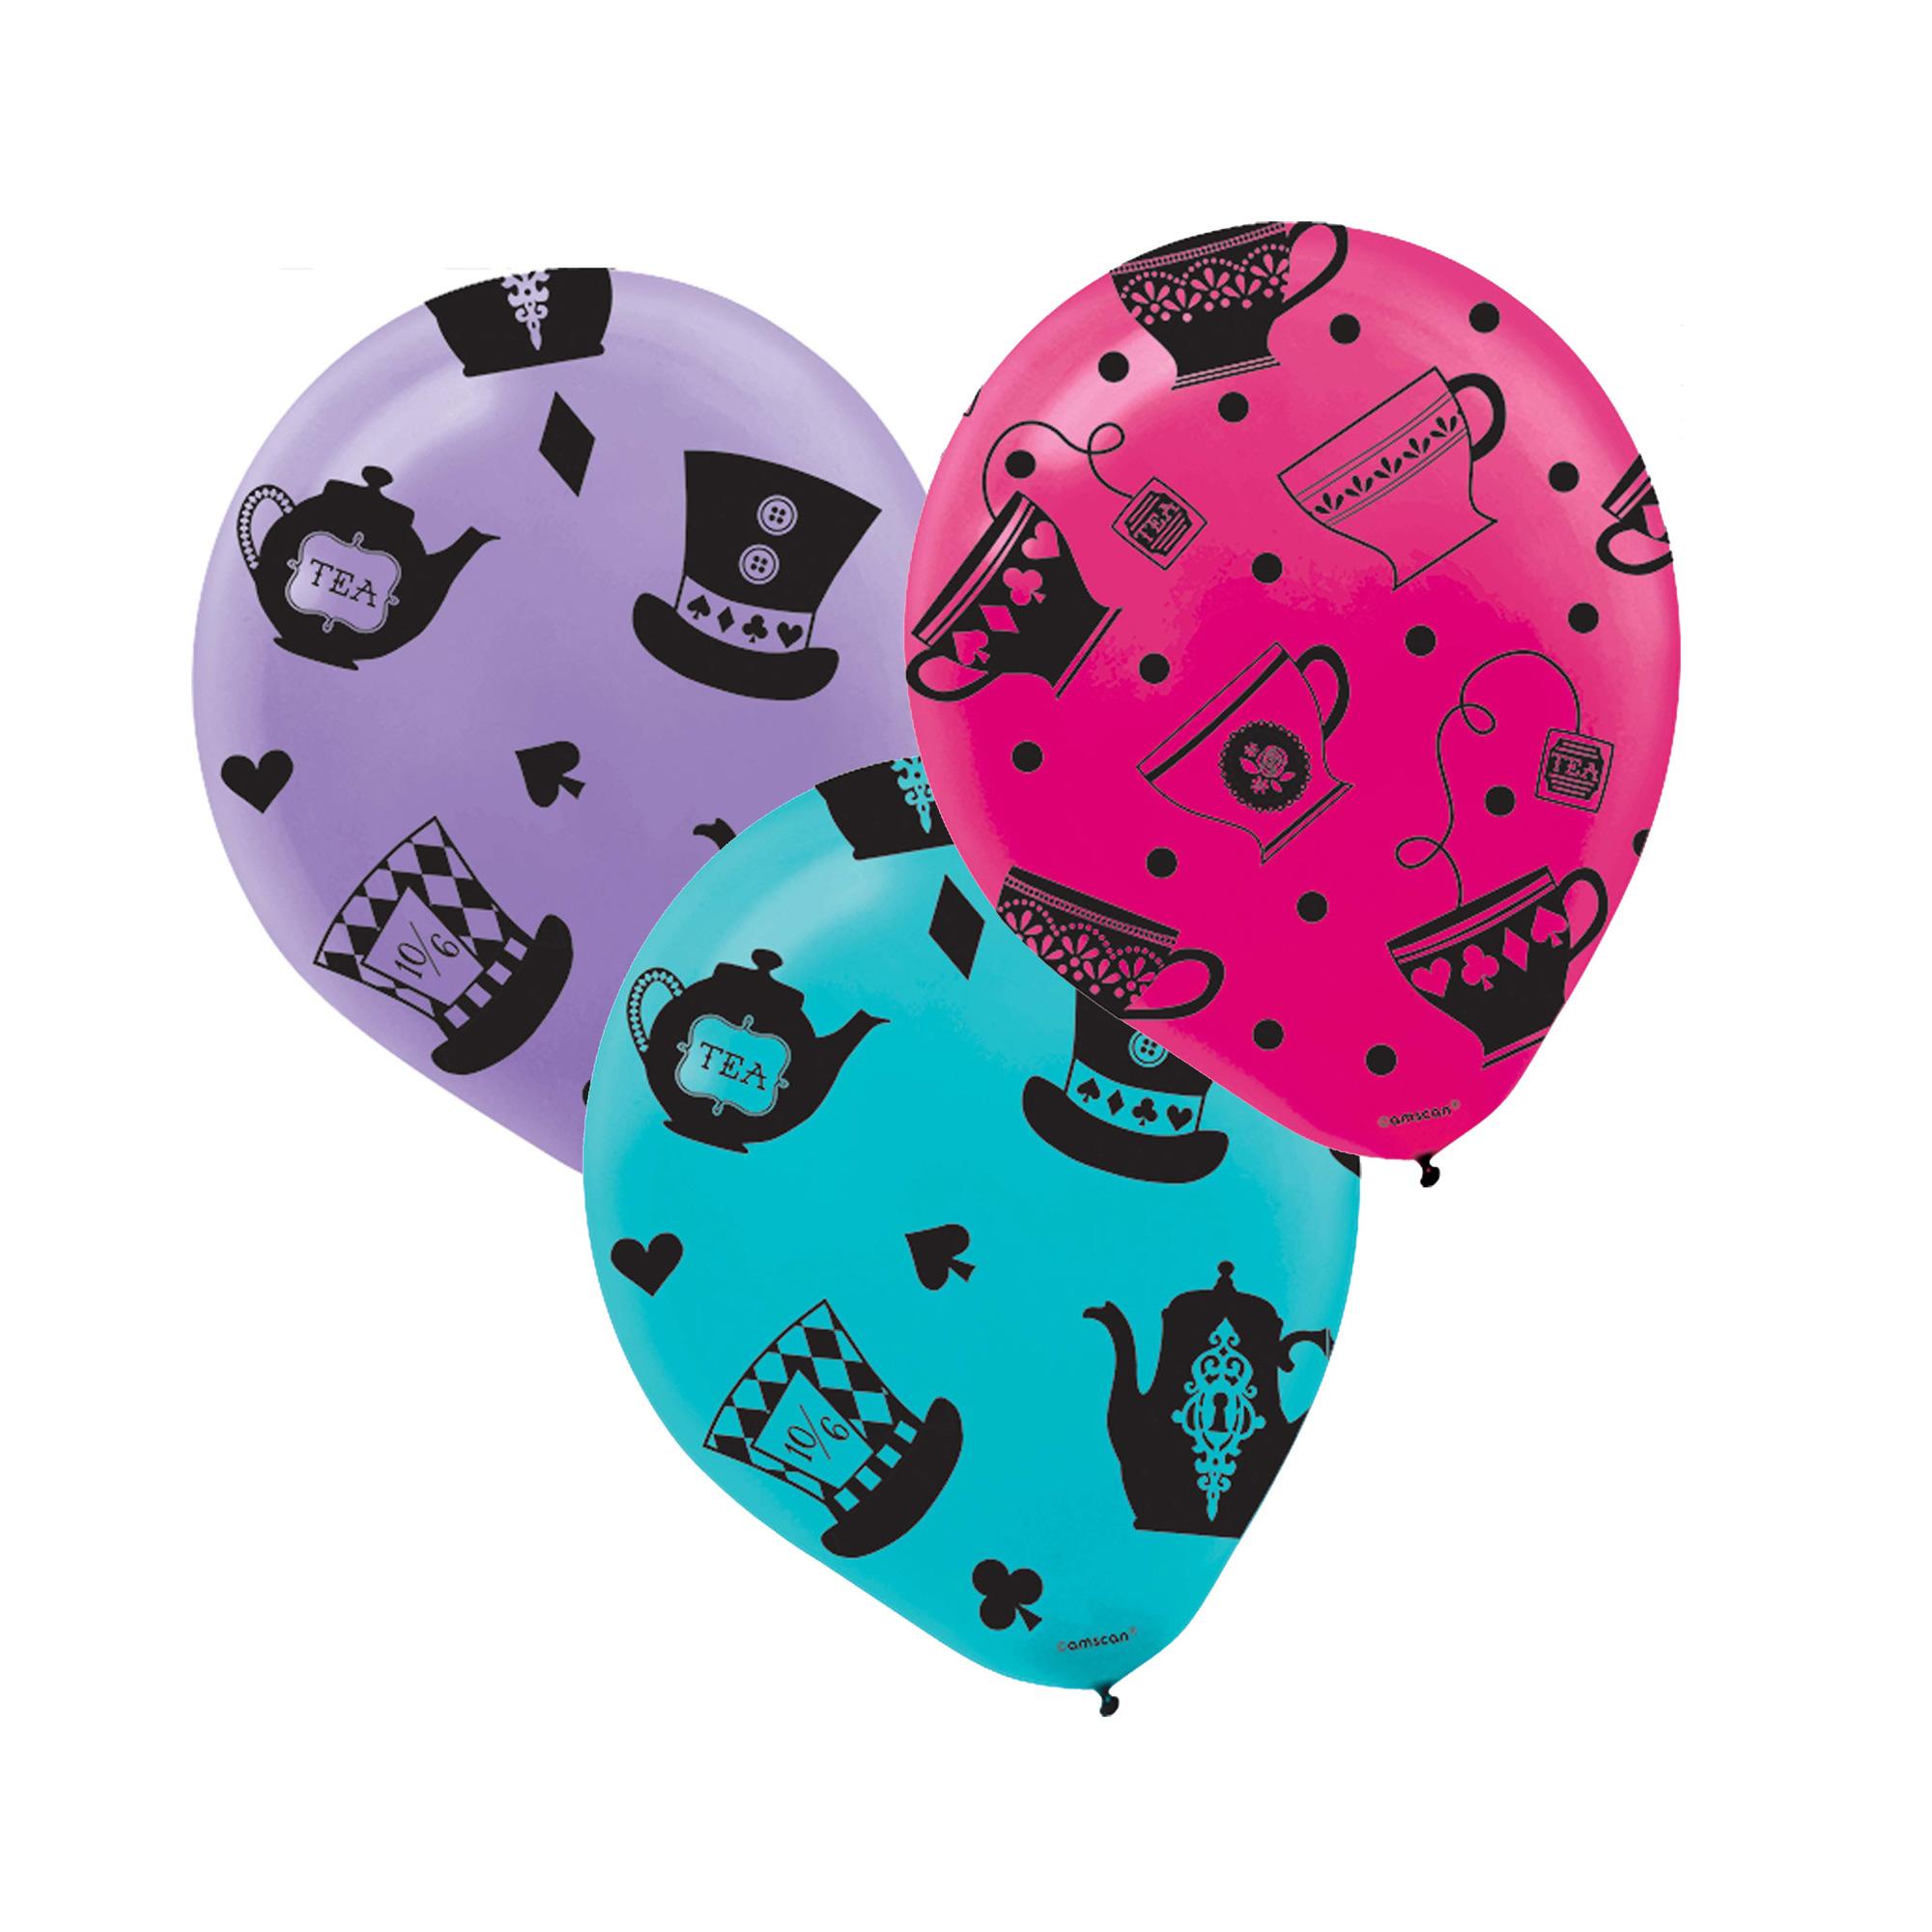 Mad Tea Party Printed Latex Balloon 6pcs Balloons & Streamers - Party Centre - Party Centre